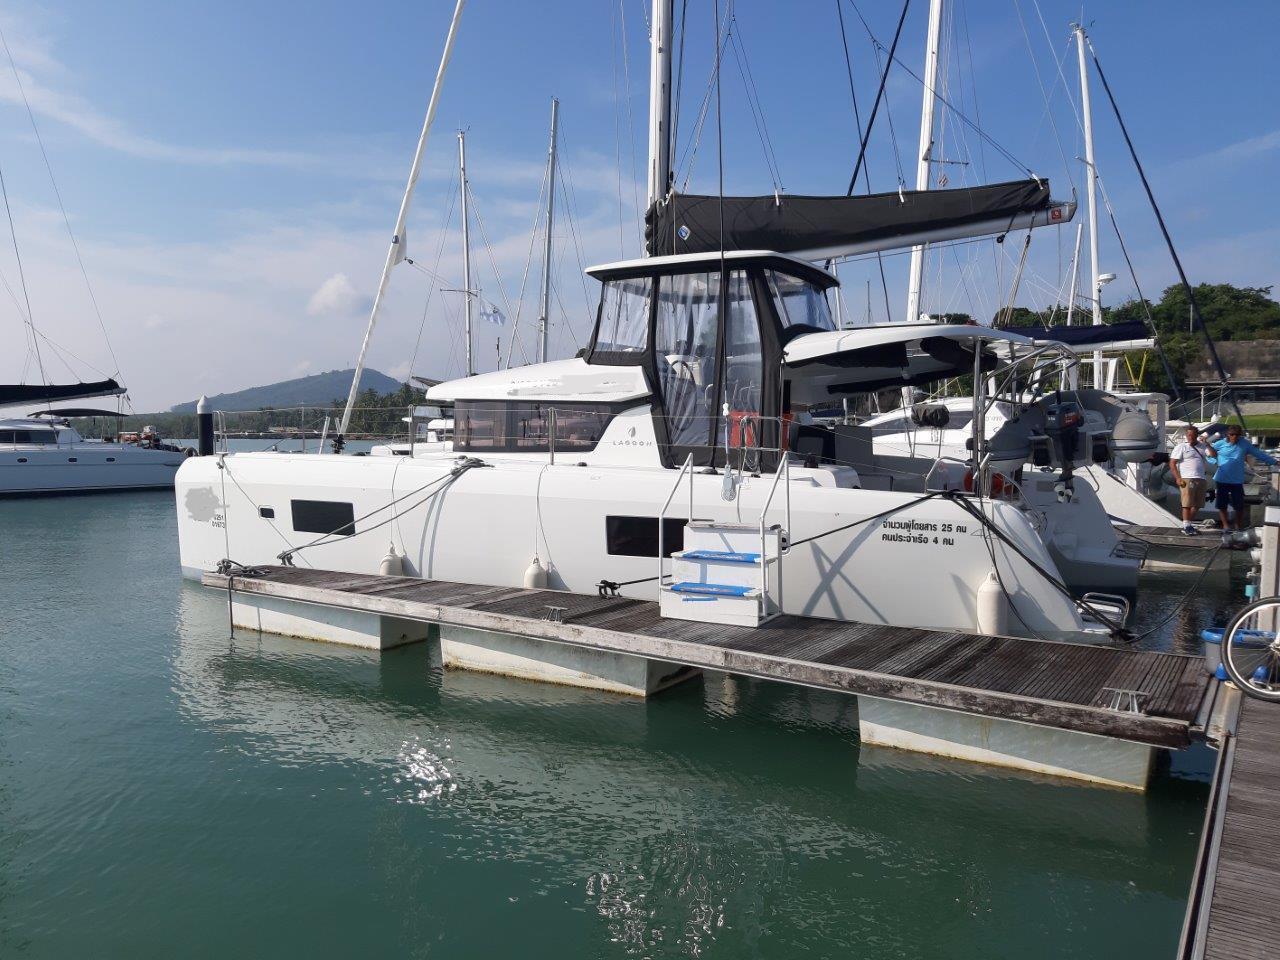 Lagoon 42 - Yacht Charter Queensland & Boat hire in Australia Queensland Whitsundays Coral Sea Marina 1